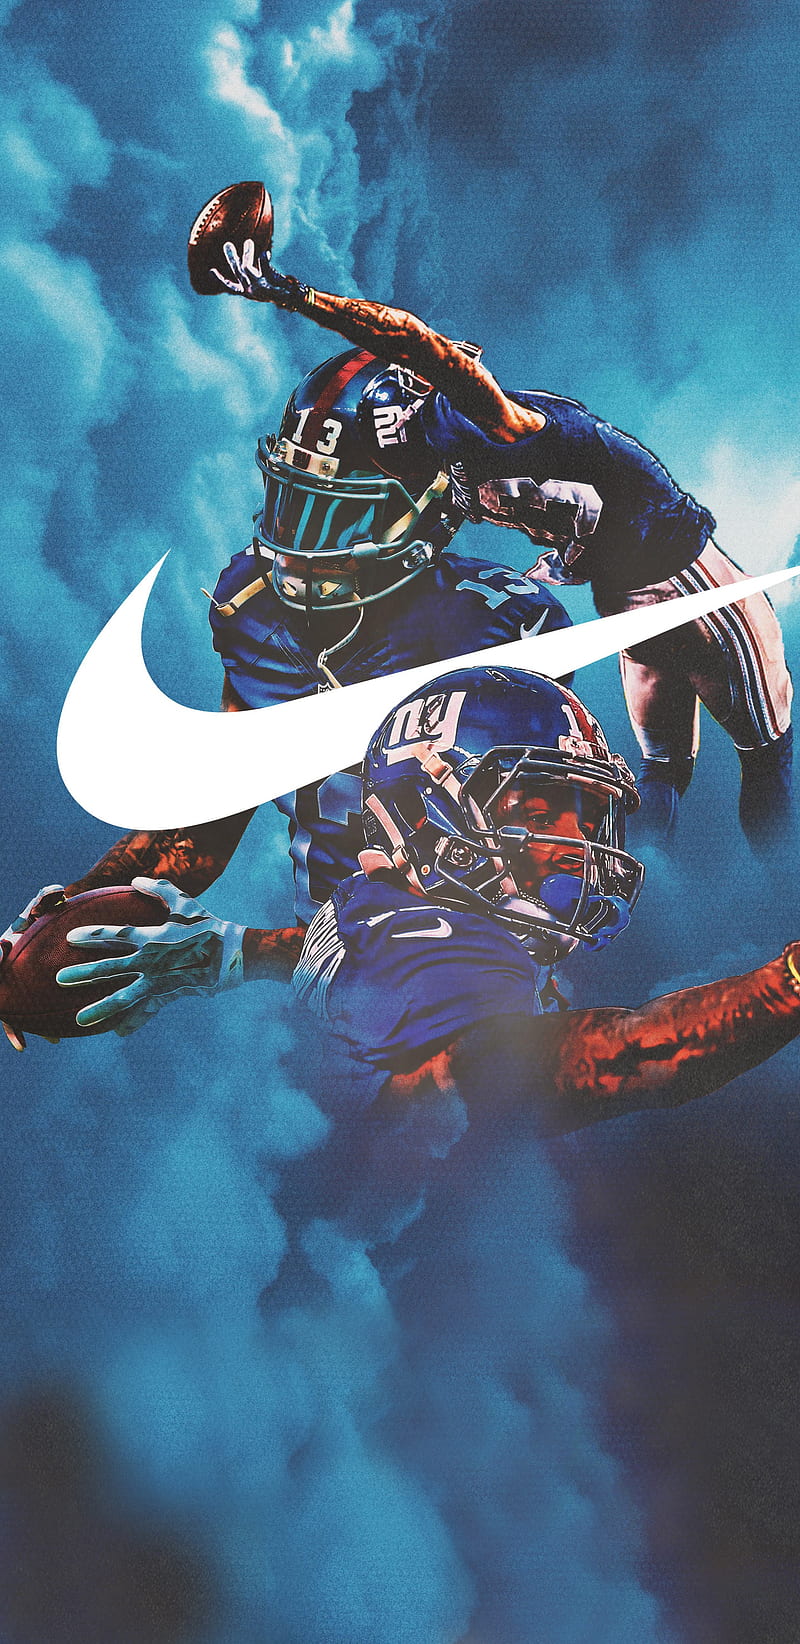 NY Giants Wallpaper HD 74 images